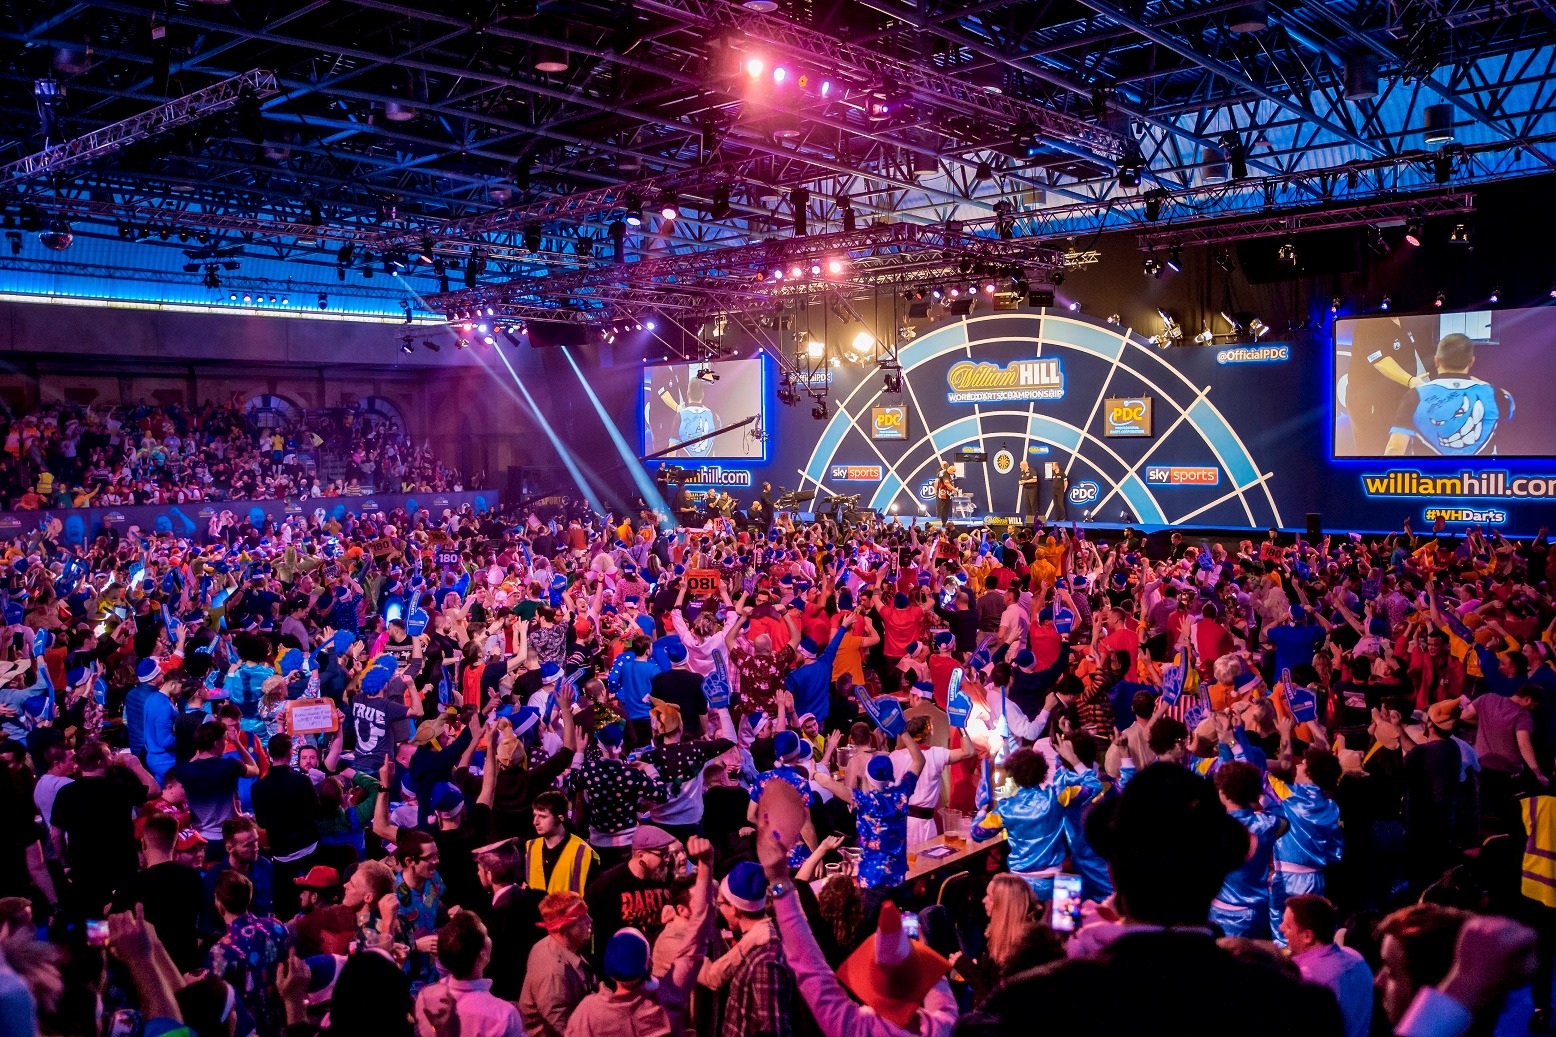 New fouryear deal keeps William Hill World Darts Championship at Ally